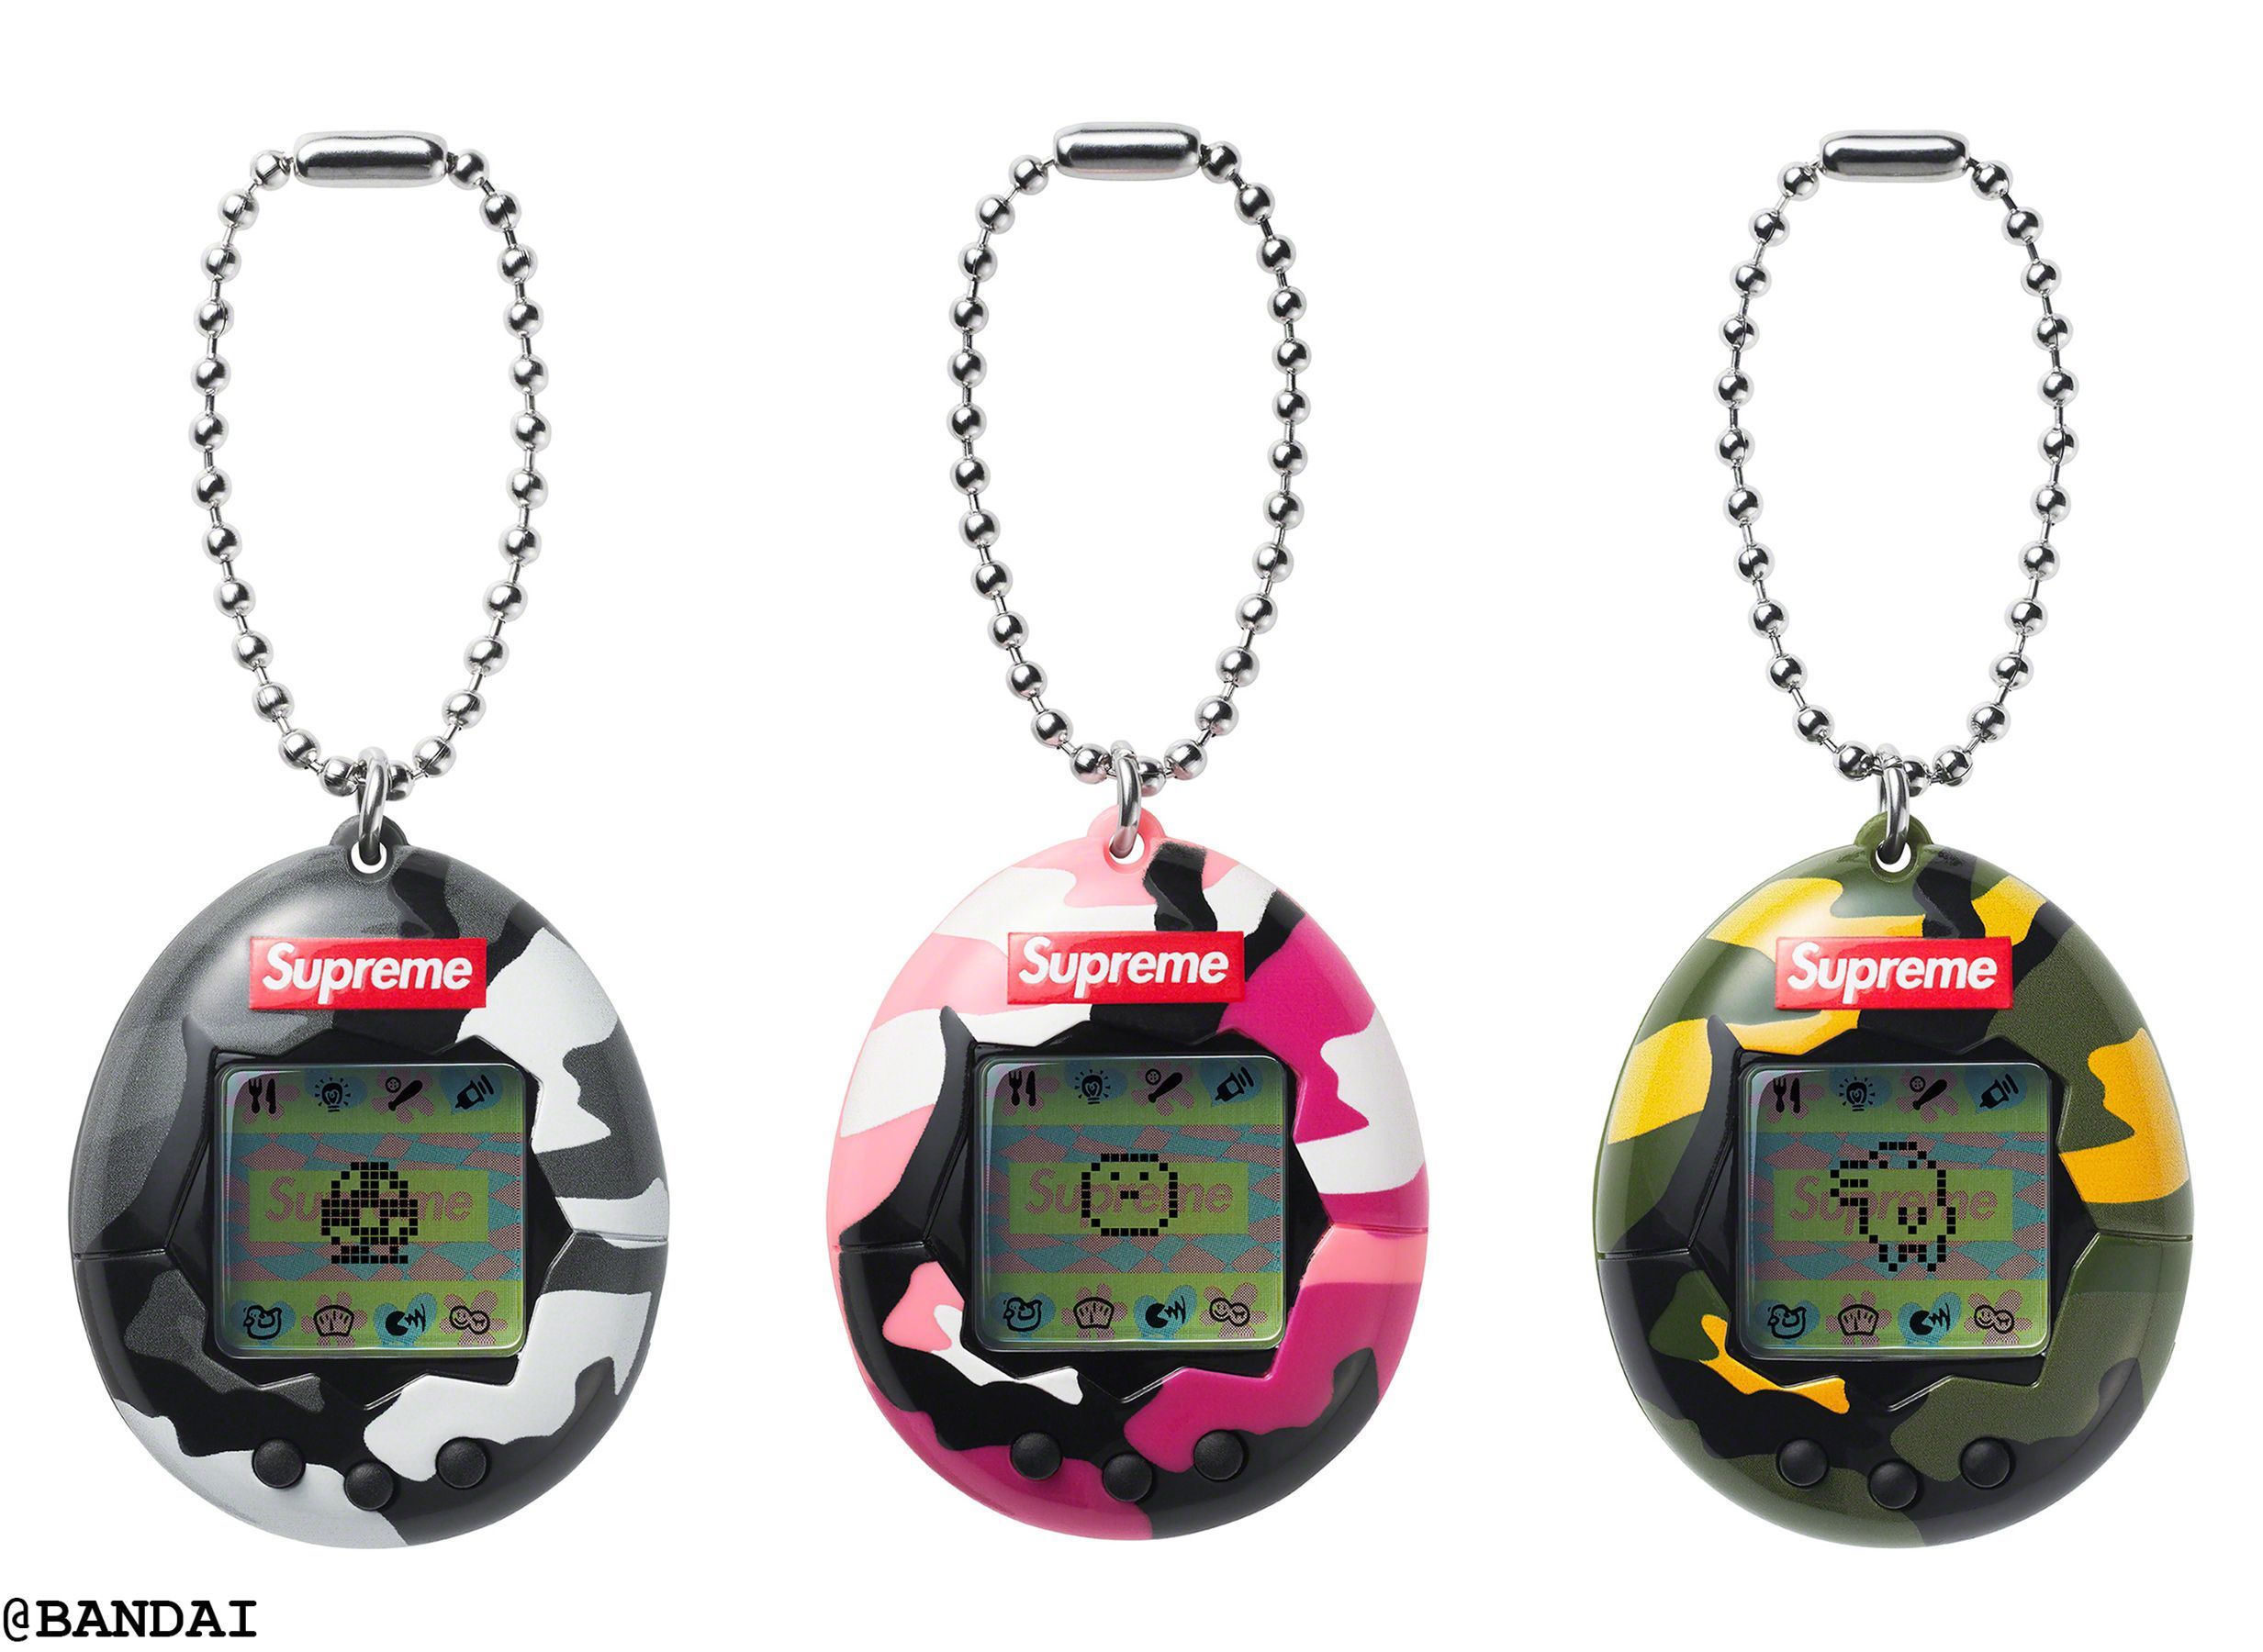 Supreme’s take on Tamagotchi is here